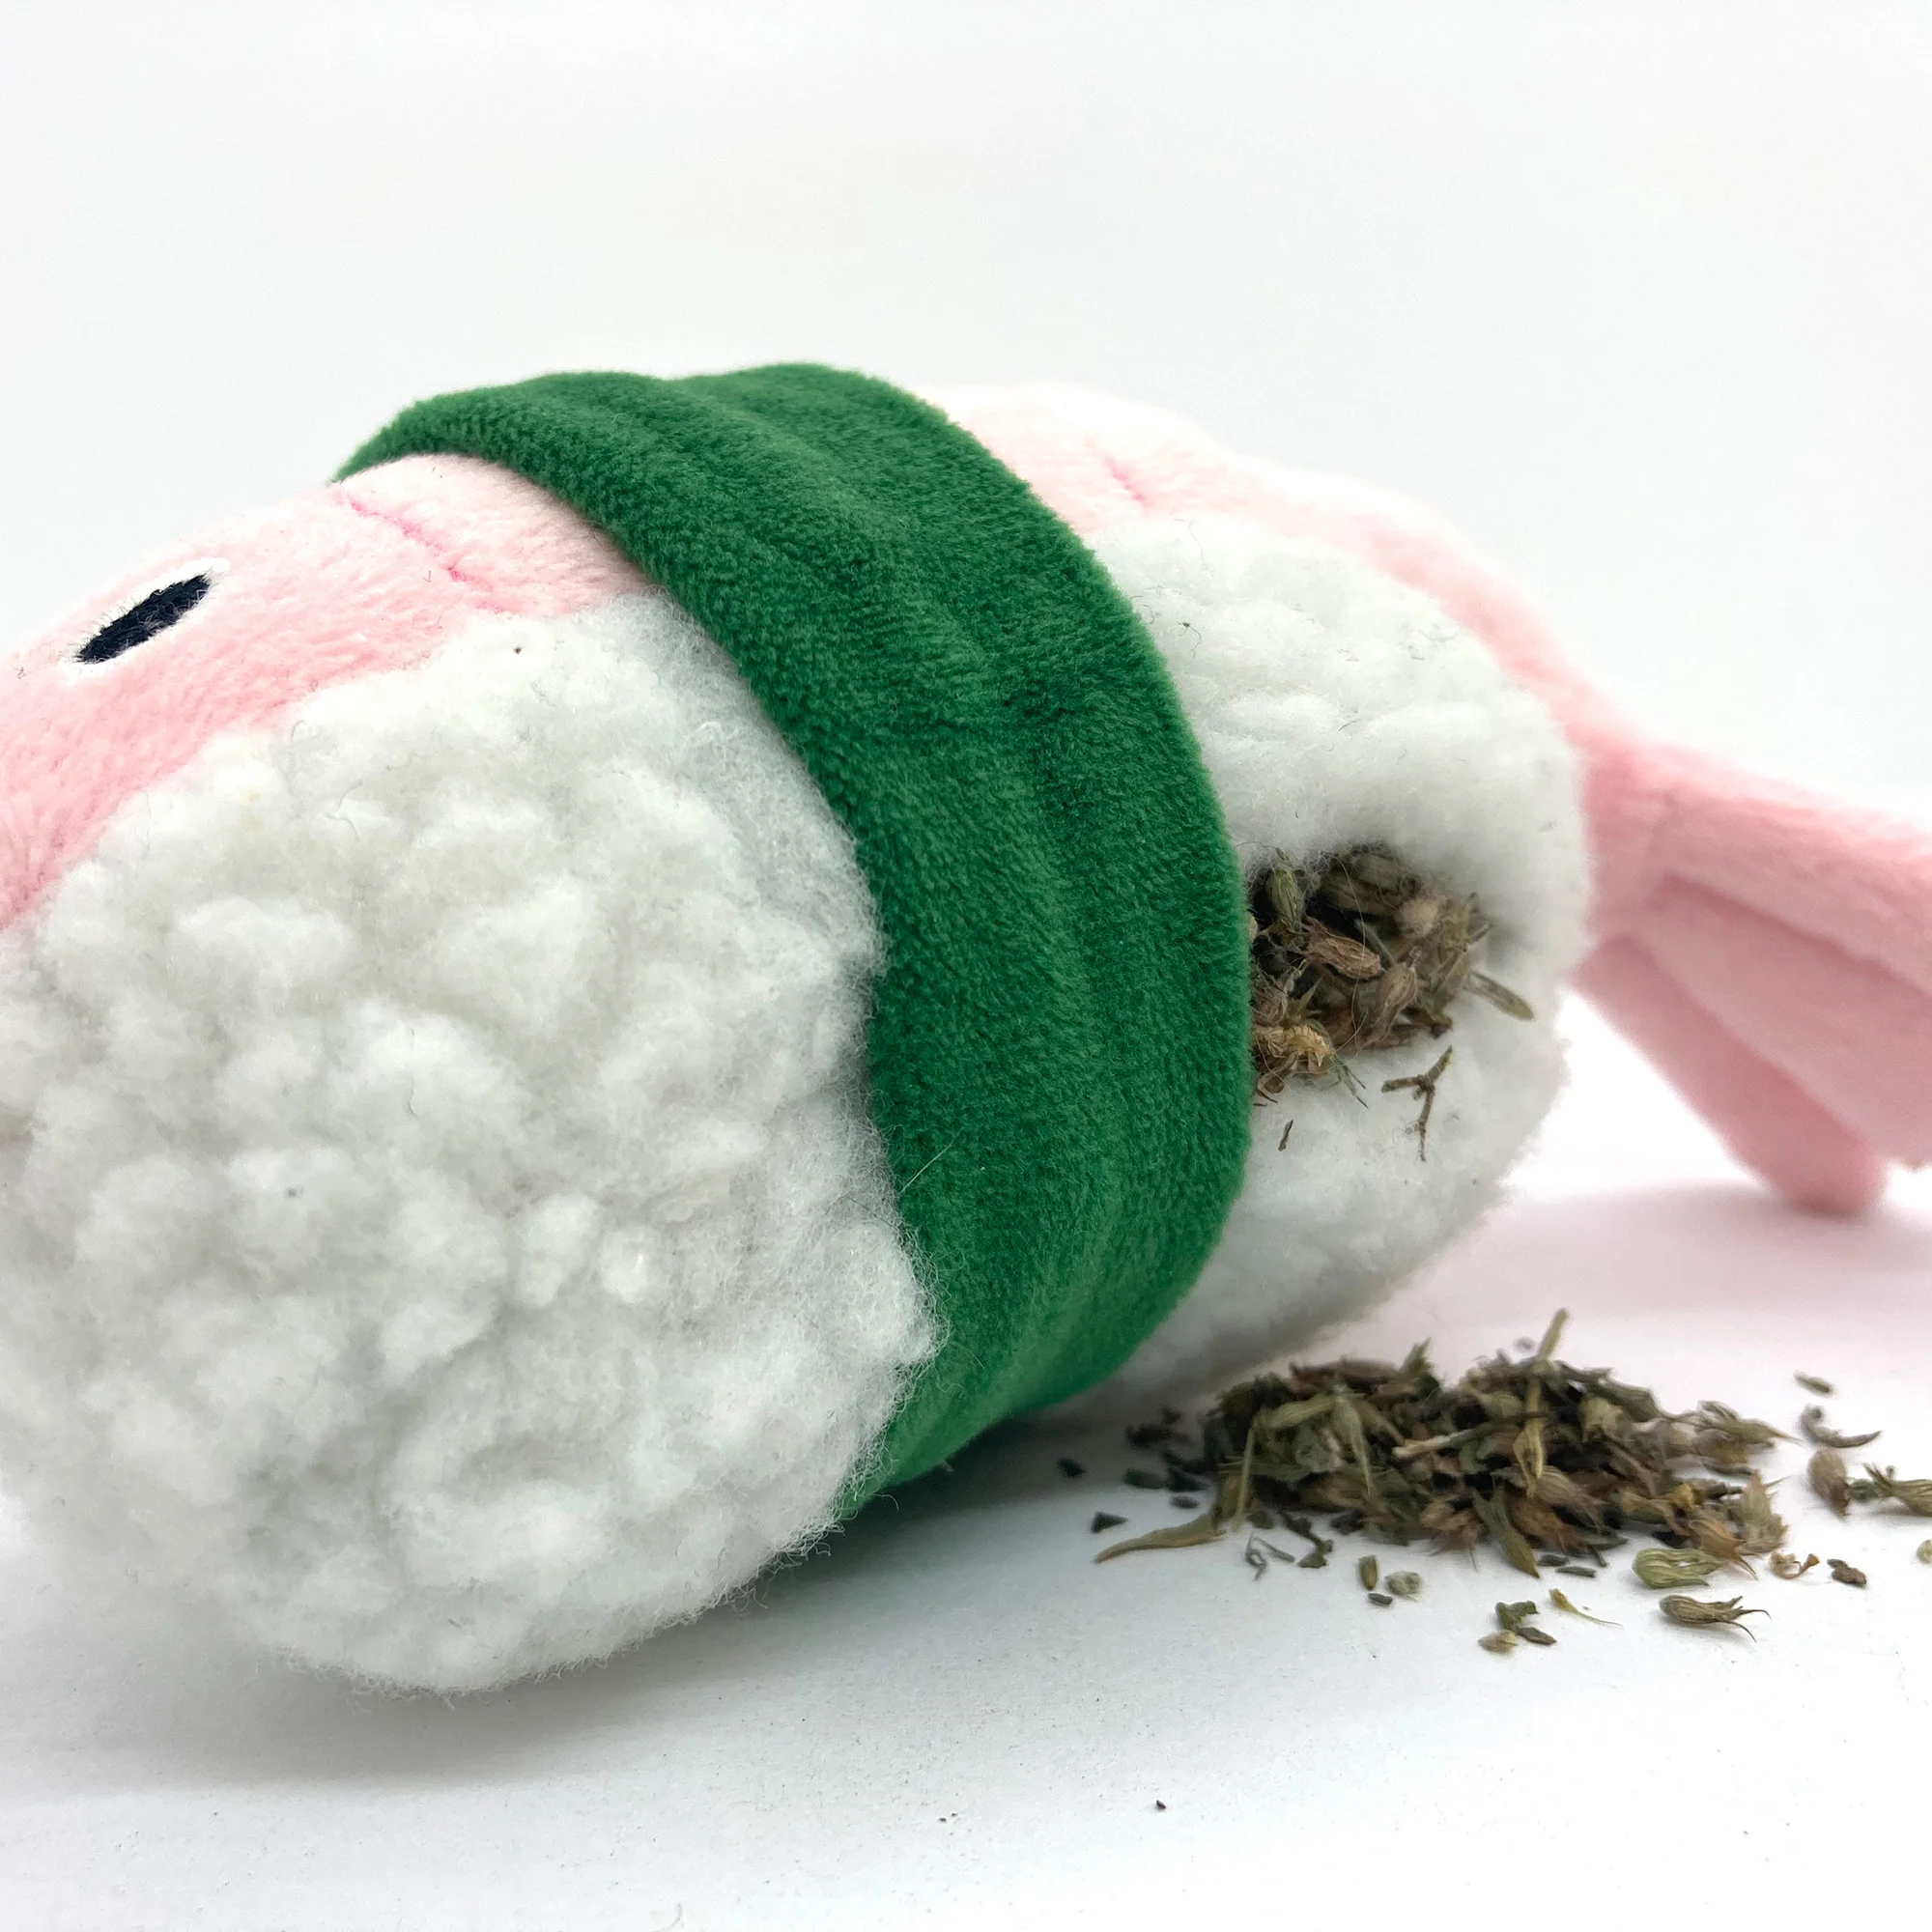 Meowijuana Get Wrapped Sushi Roll Refillable Catnip Cat Toy